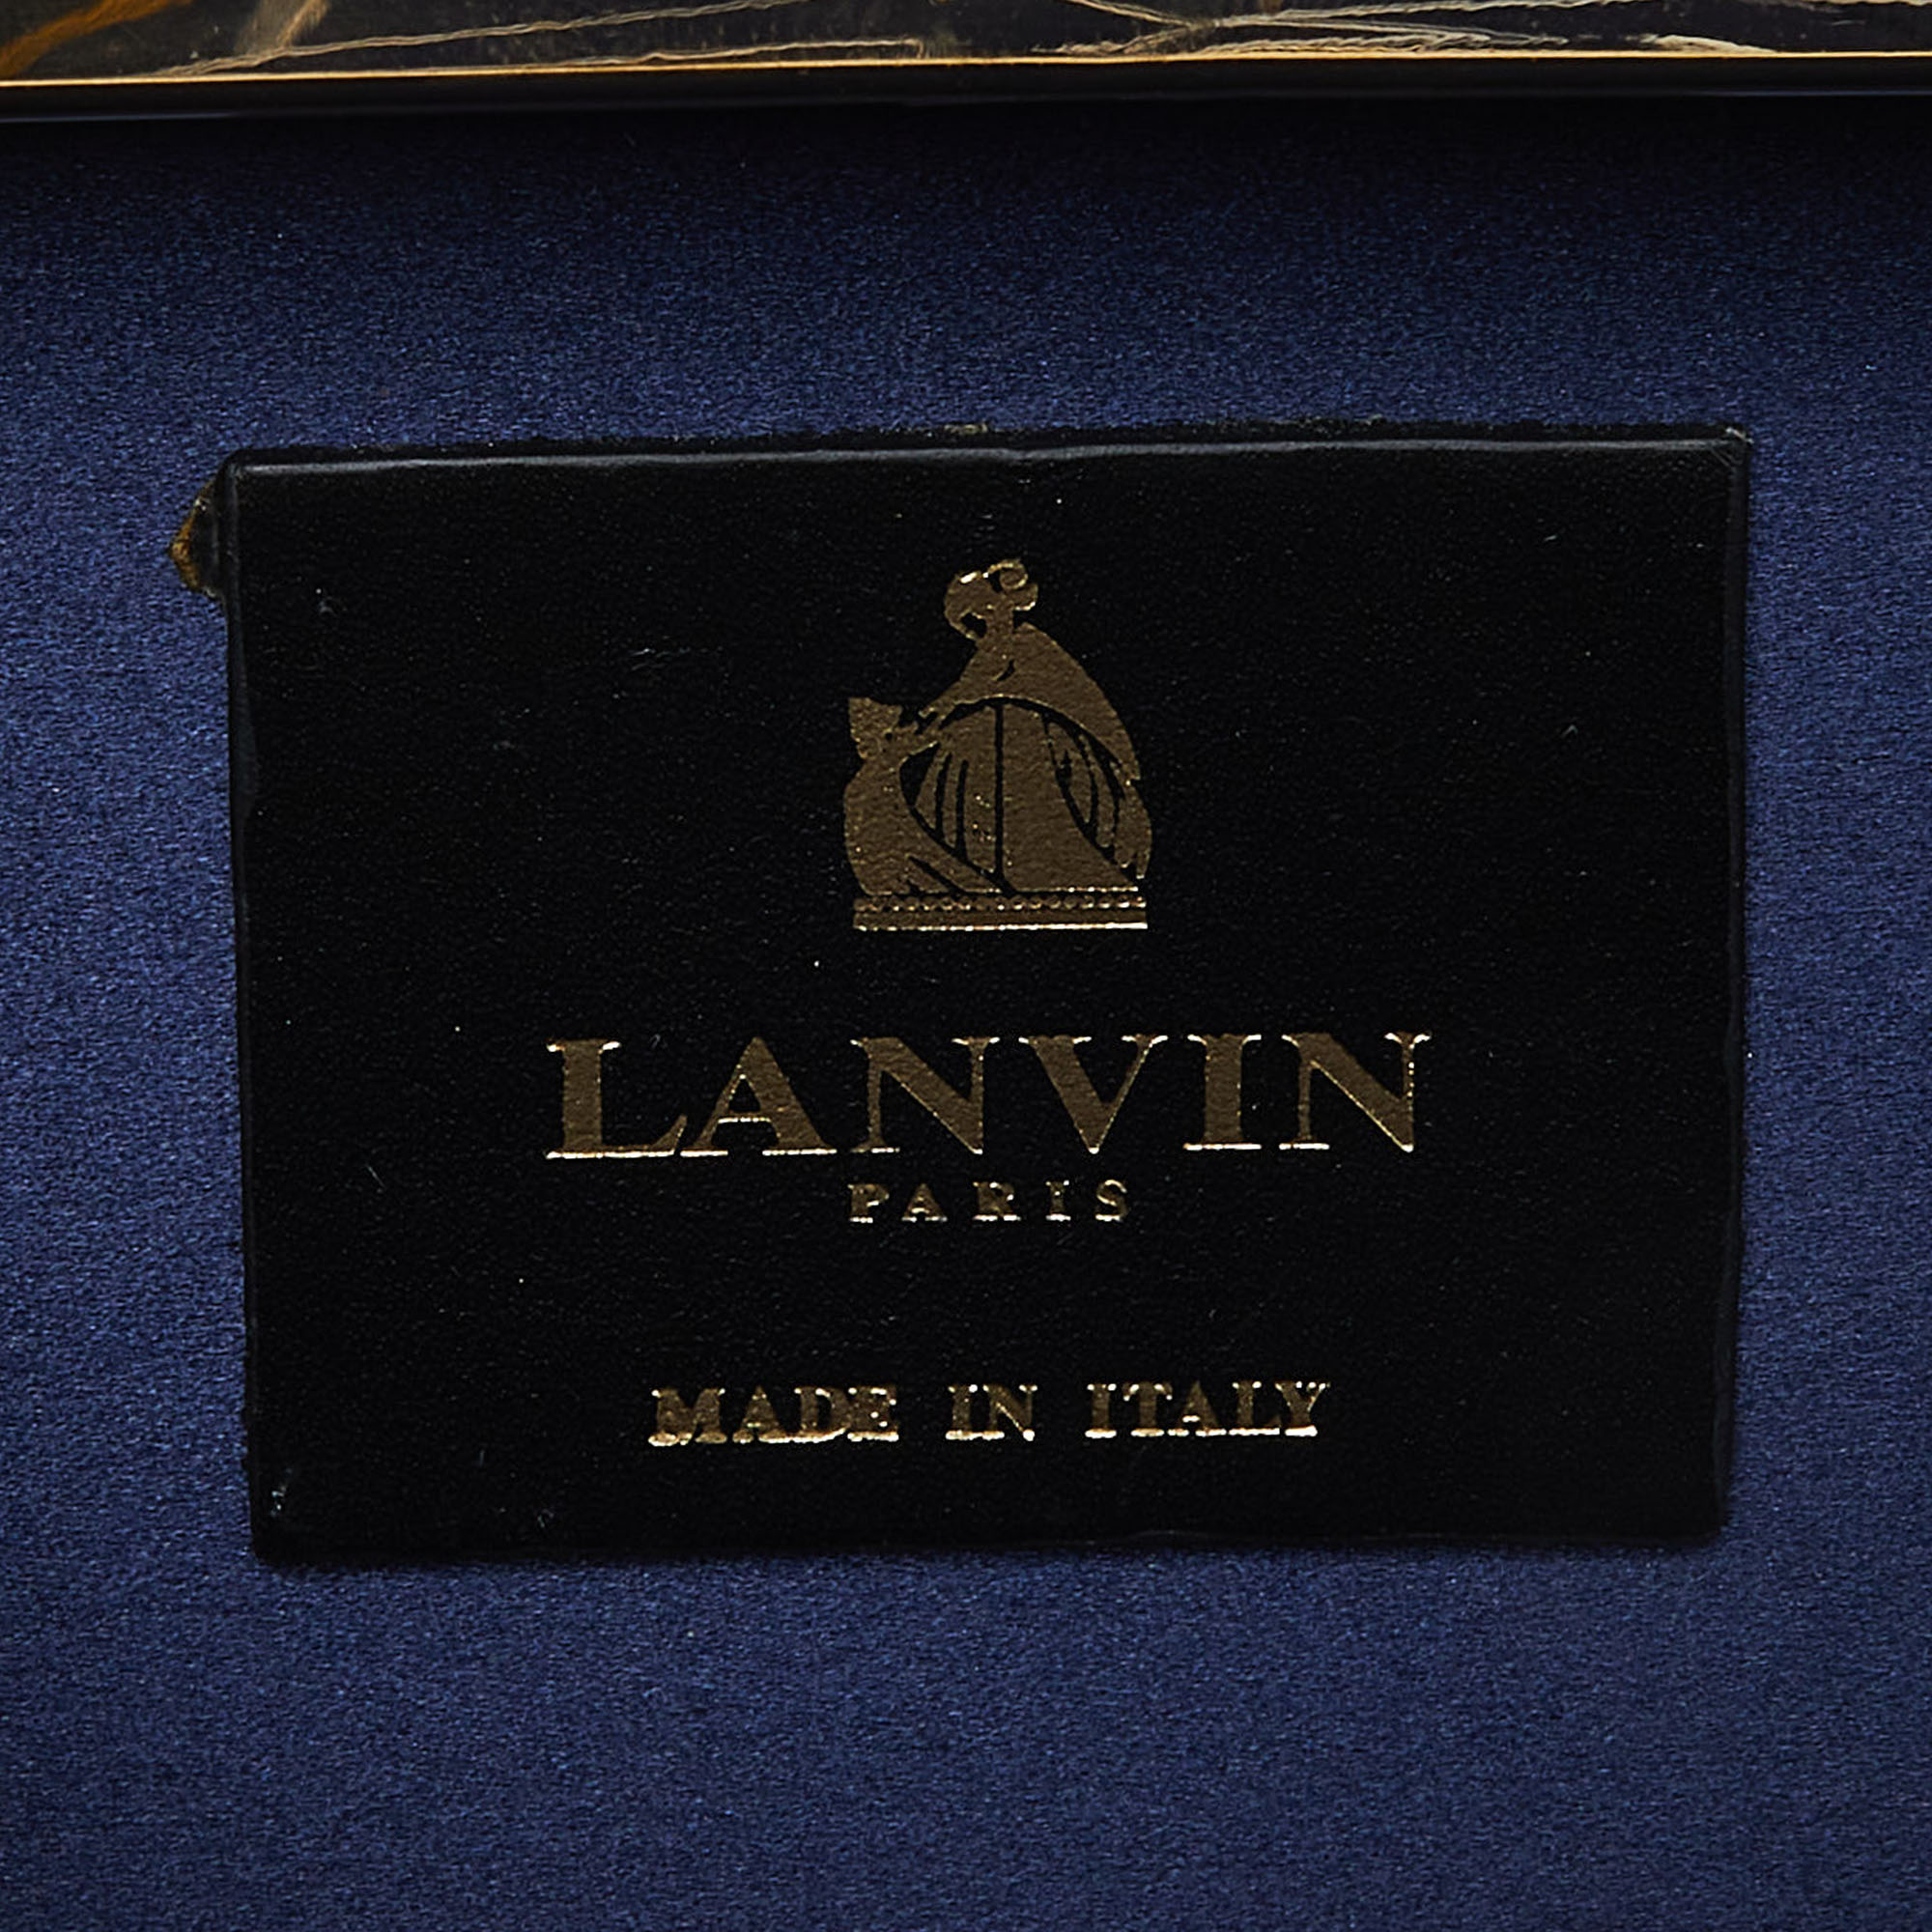 Lanvin Beige/Gold Printed Leather Chain Clutch